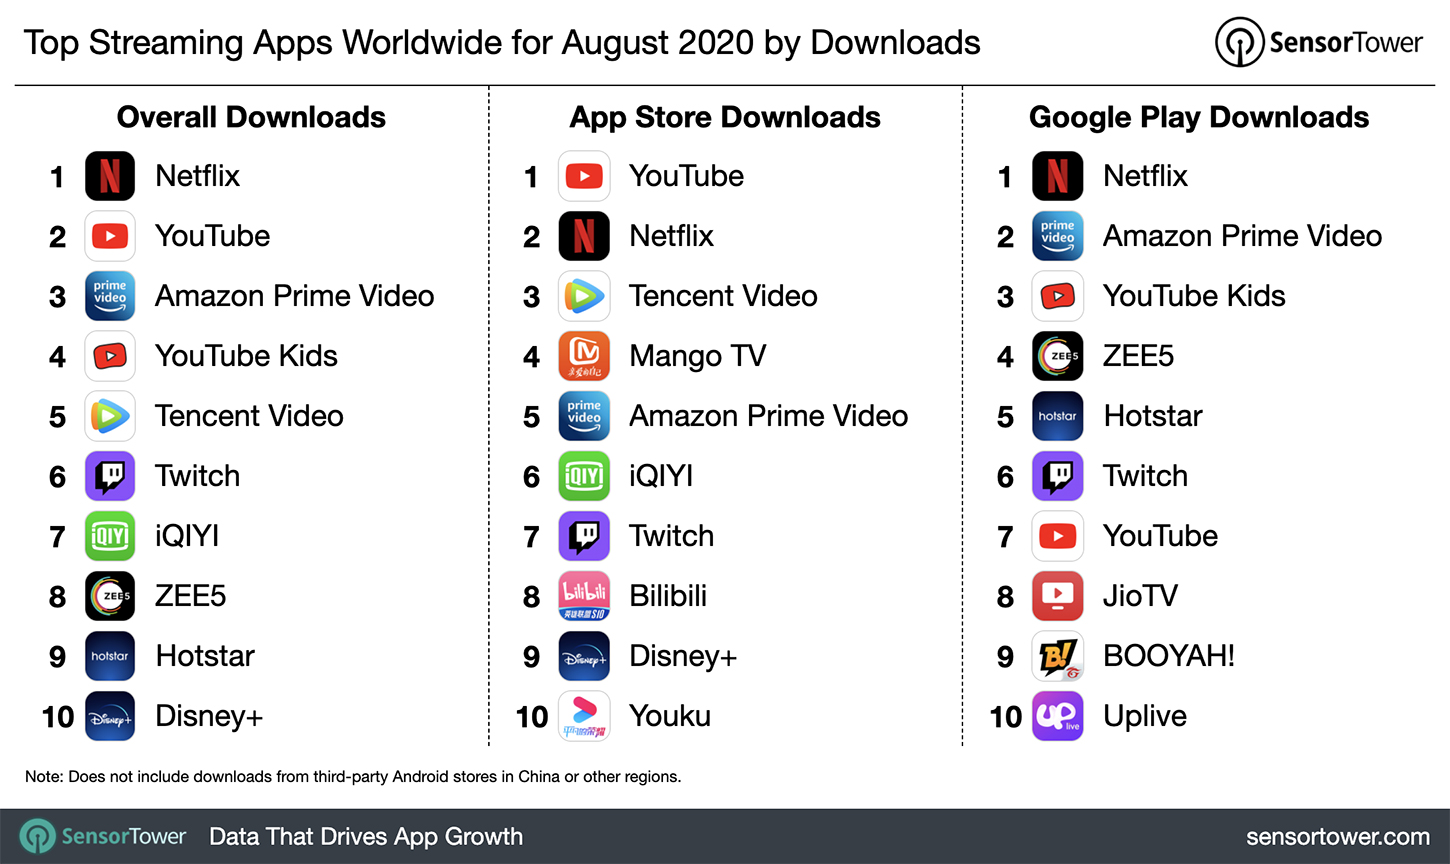 Top Streaming Apps Worldwide for August 2020 by Downloads